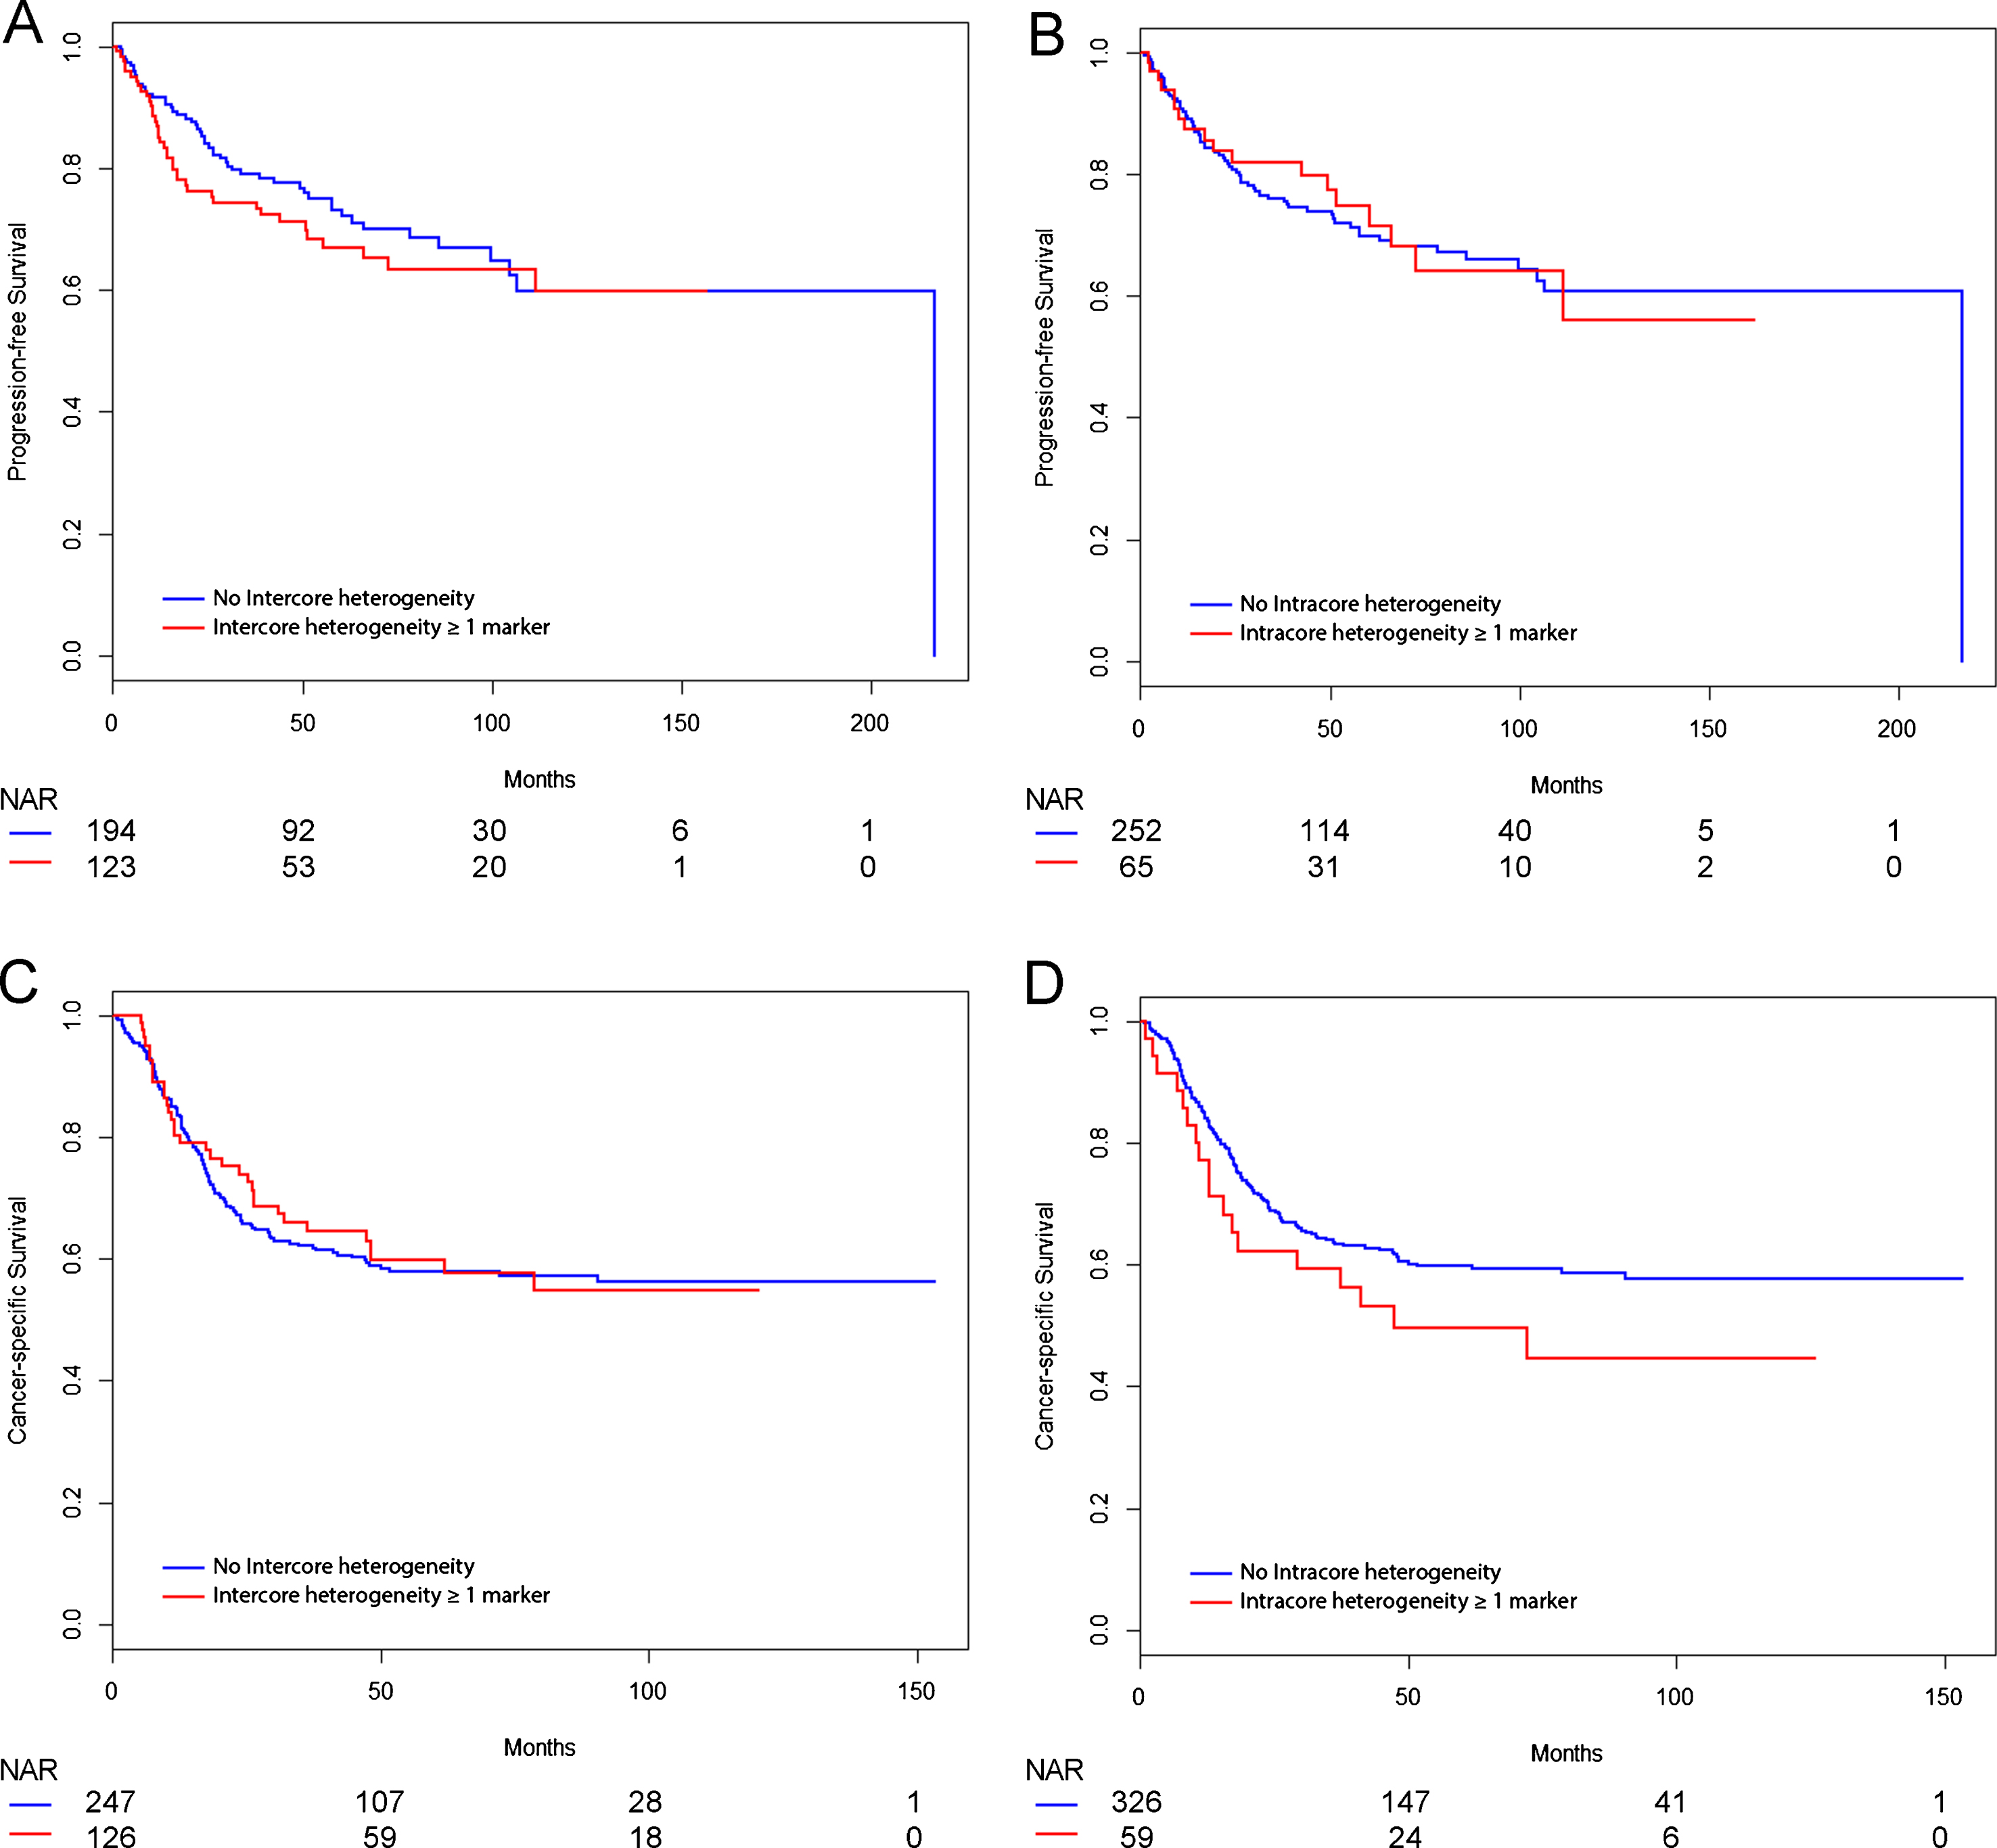 Kaplan-Meier curves showing survival analysis. Progression-free survival (PFS) analysis included 317 patients, and cancer-specific survival (CSS) analysis comprised 373 patients stratified for intercore heterogeneity and 385 patients stratified for intracore heterogeneity. Univariate Cox regression analysis showed no significant differences in PFS or CSS. (A) PFS for intercore heterogeneity in one or more markers. (B) PFS for intracore heterogeneity in one or more markers. (C) CSS for intercore heterogeneity in one or more markers. (D) CSS for intracore heterogeneity in one or more markers. NAR, Numbers at risk.